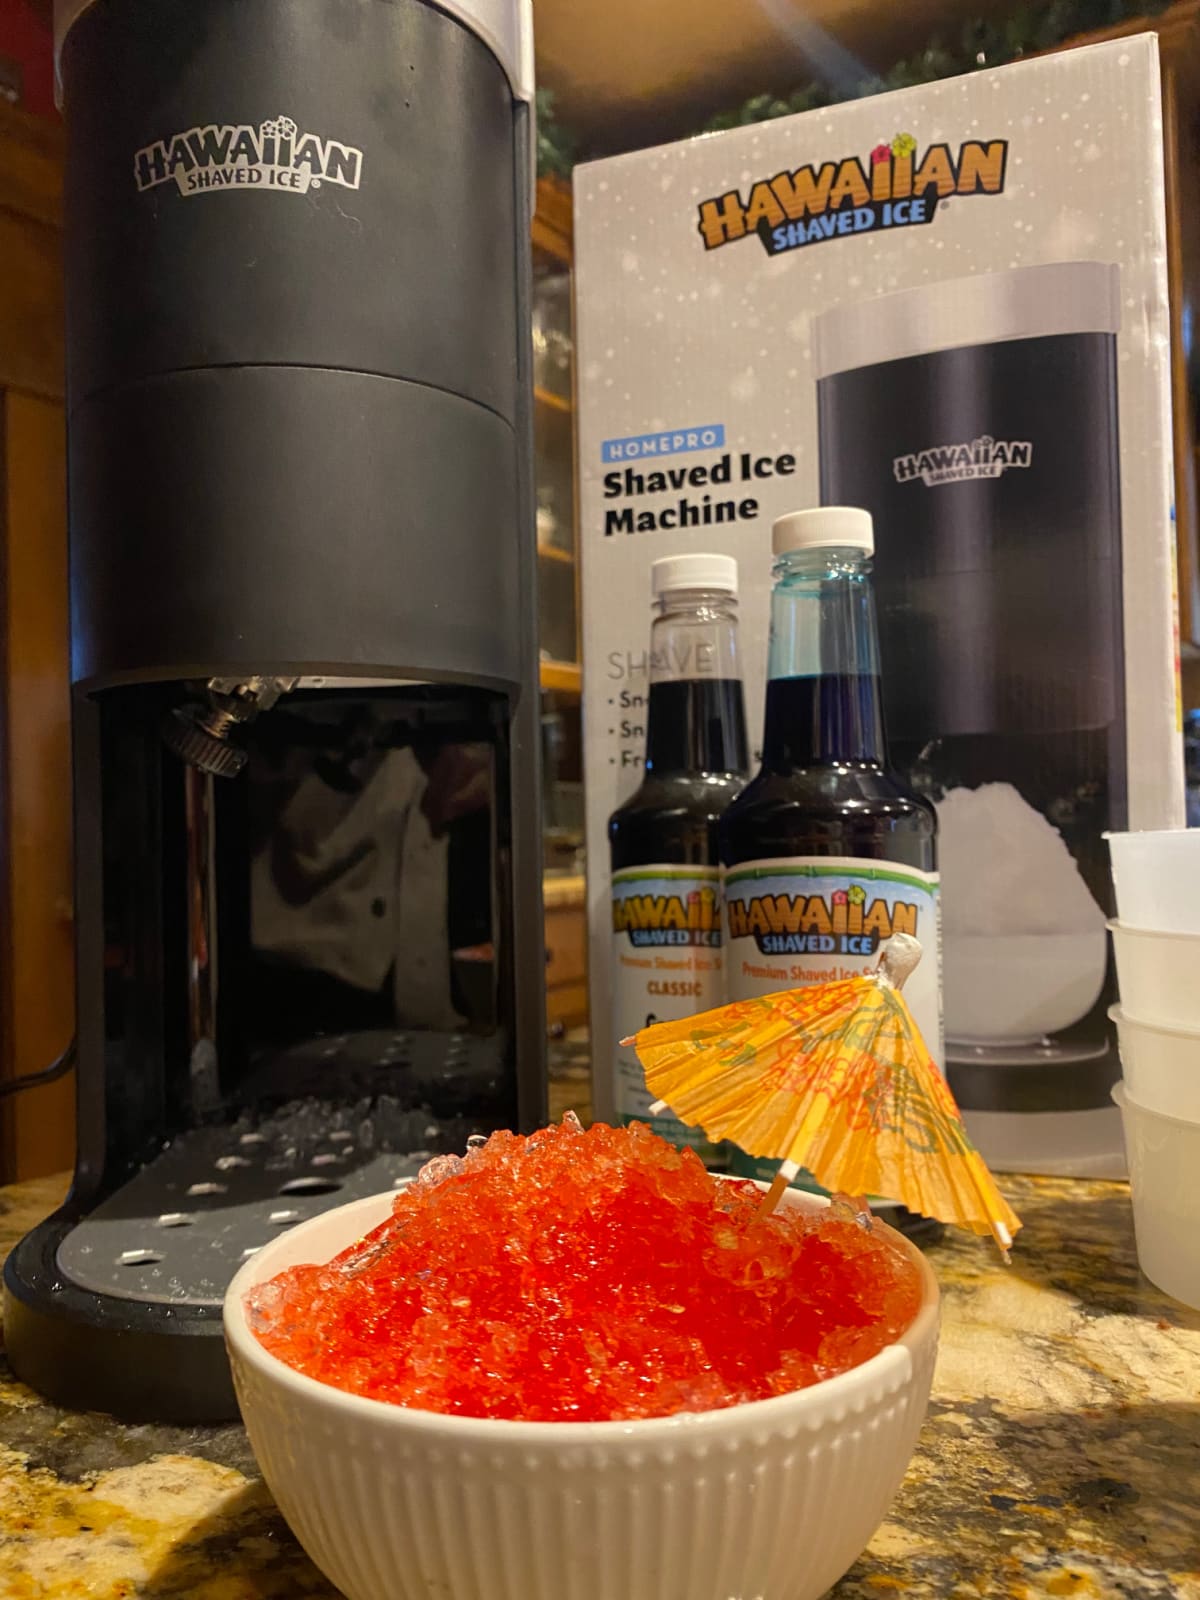 Hawaiian Shaved Ice S777 Home Pro machine with a bowl of red shaved ice and tiny umbrella